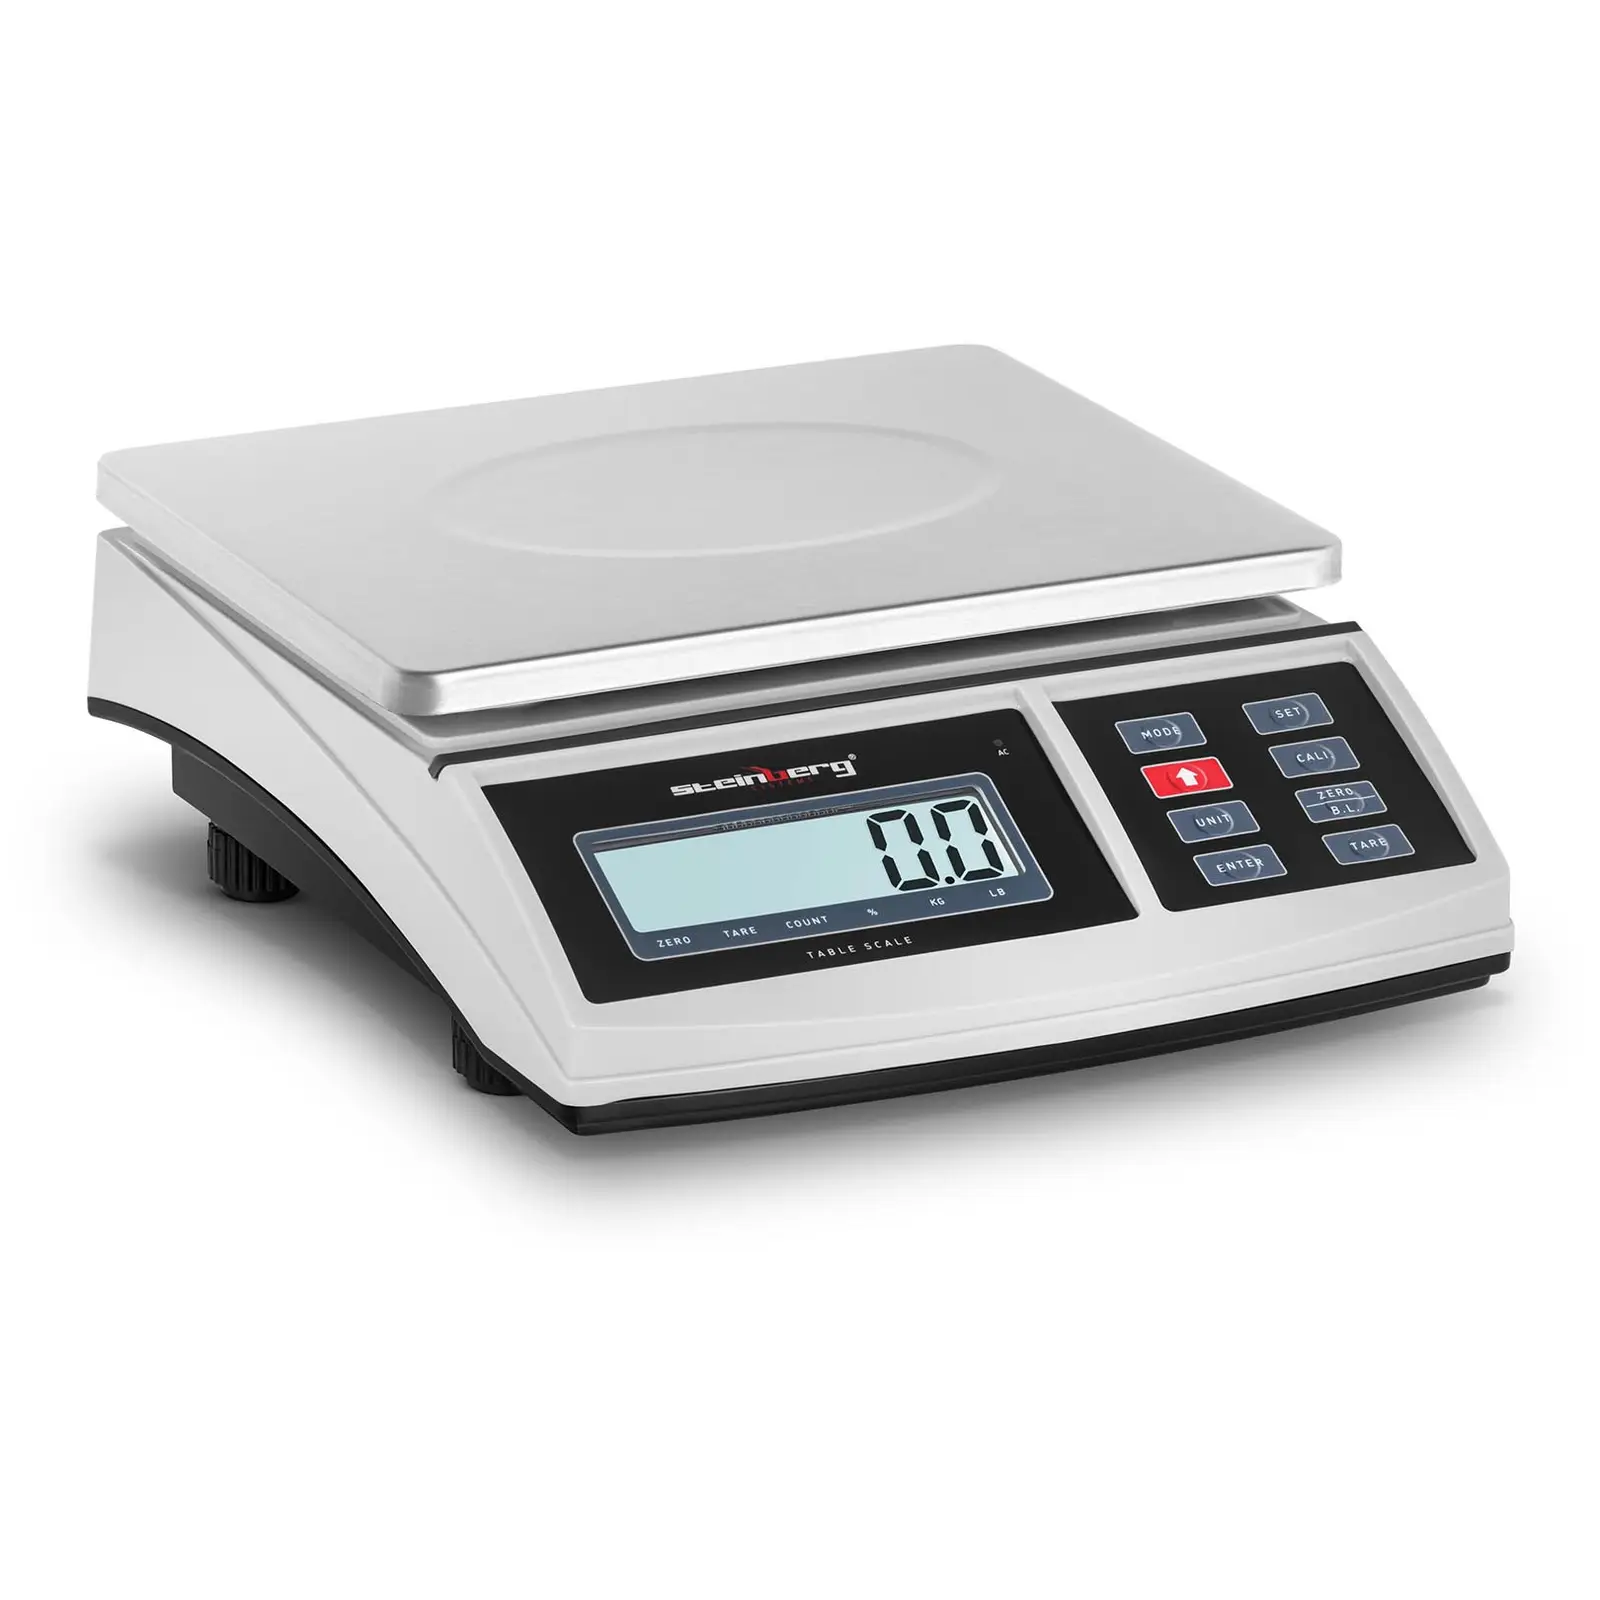 Table Scale - 30 kg / 1 g - 21 x 27 cm - LCD